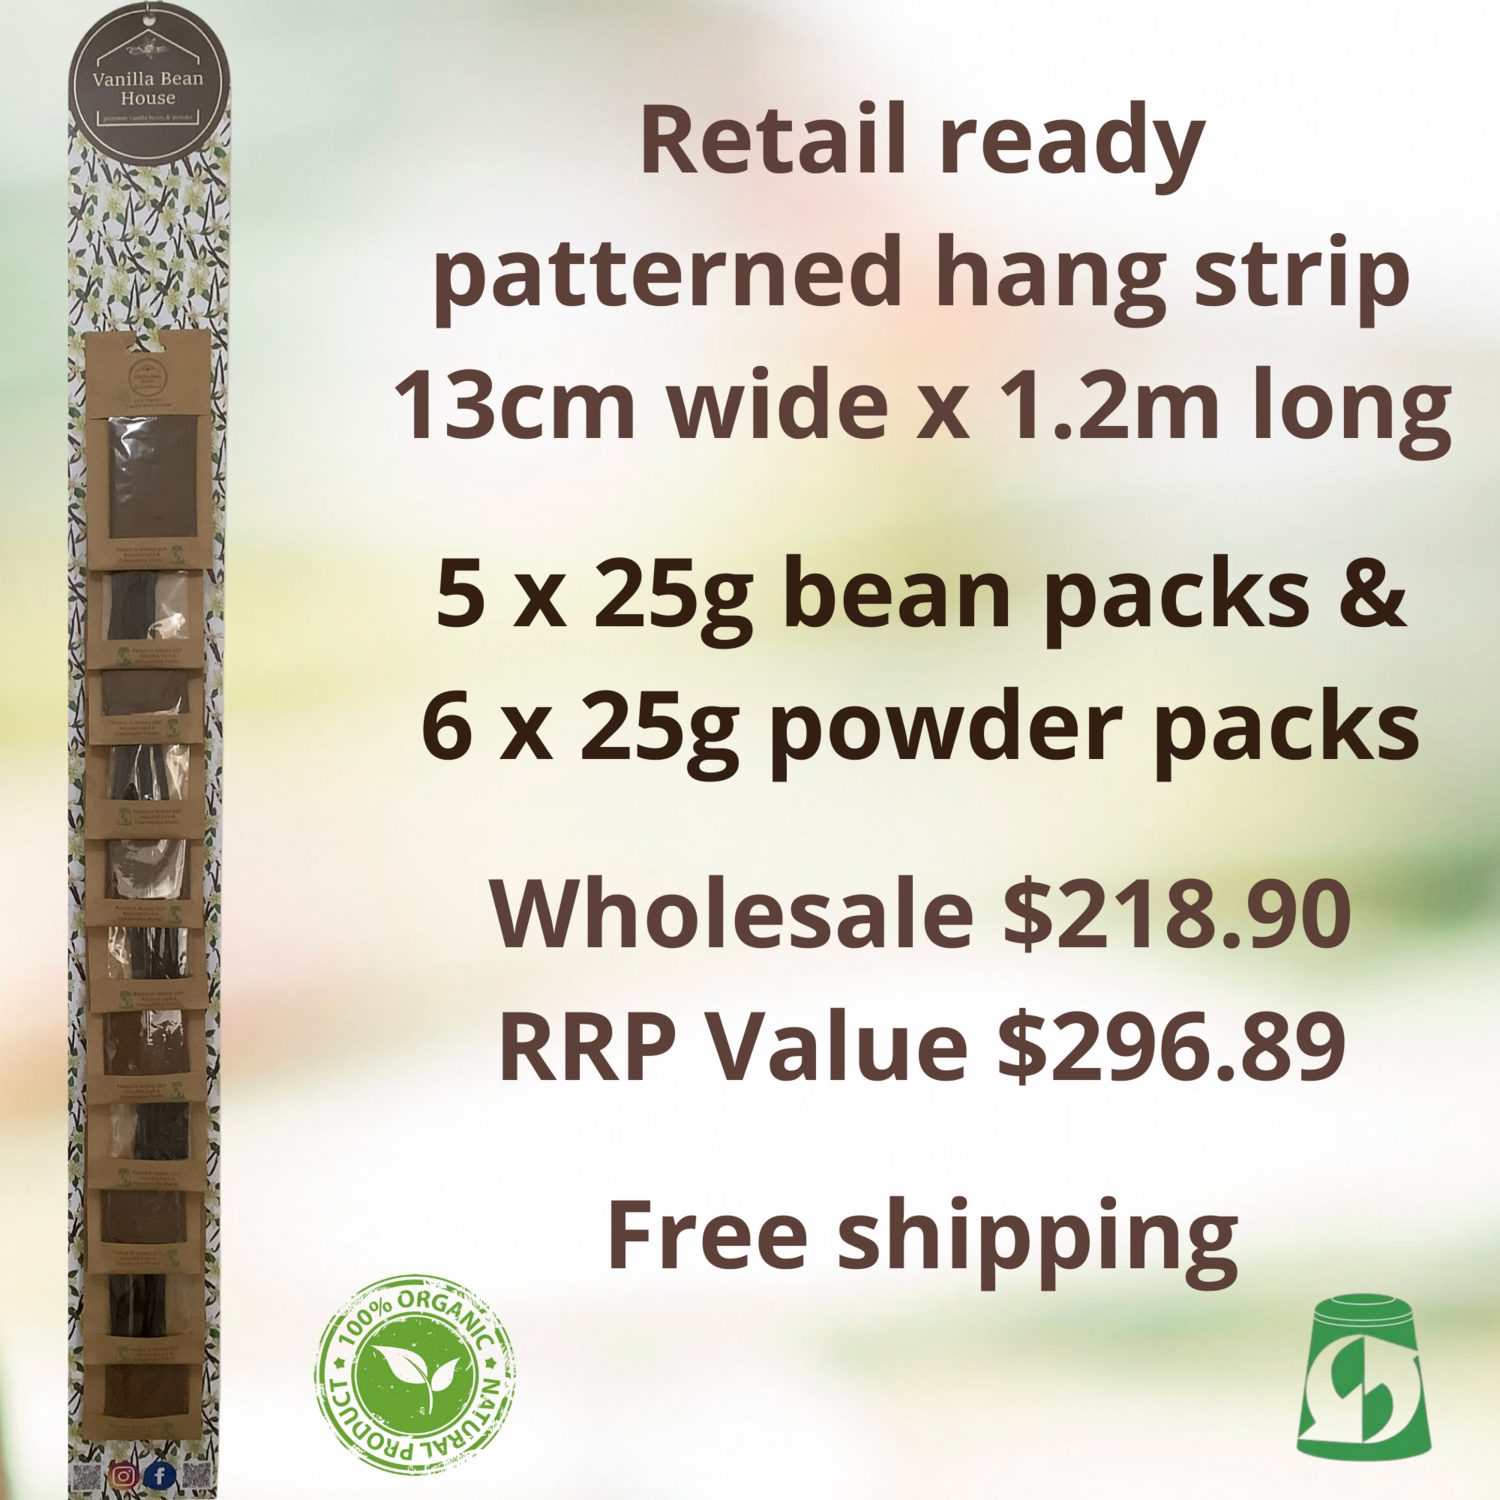 Vanilla Beans & Powder - Retail Ready Patterned Hang Strip - 11 packs 5 x 25g bean packs & 6 x 25g powder packs - organic, eco-friendly recycled card and home-compostable packaging